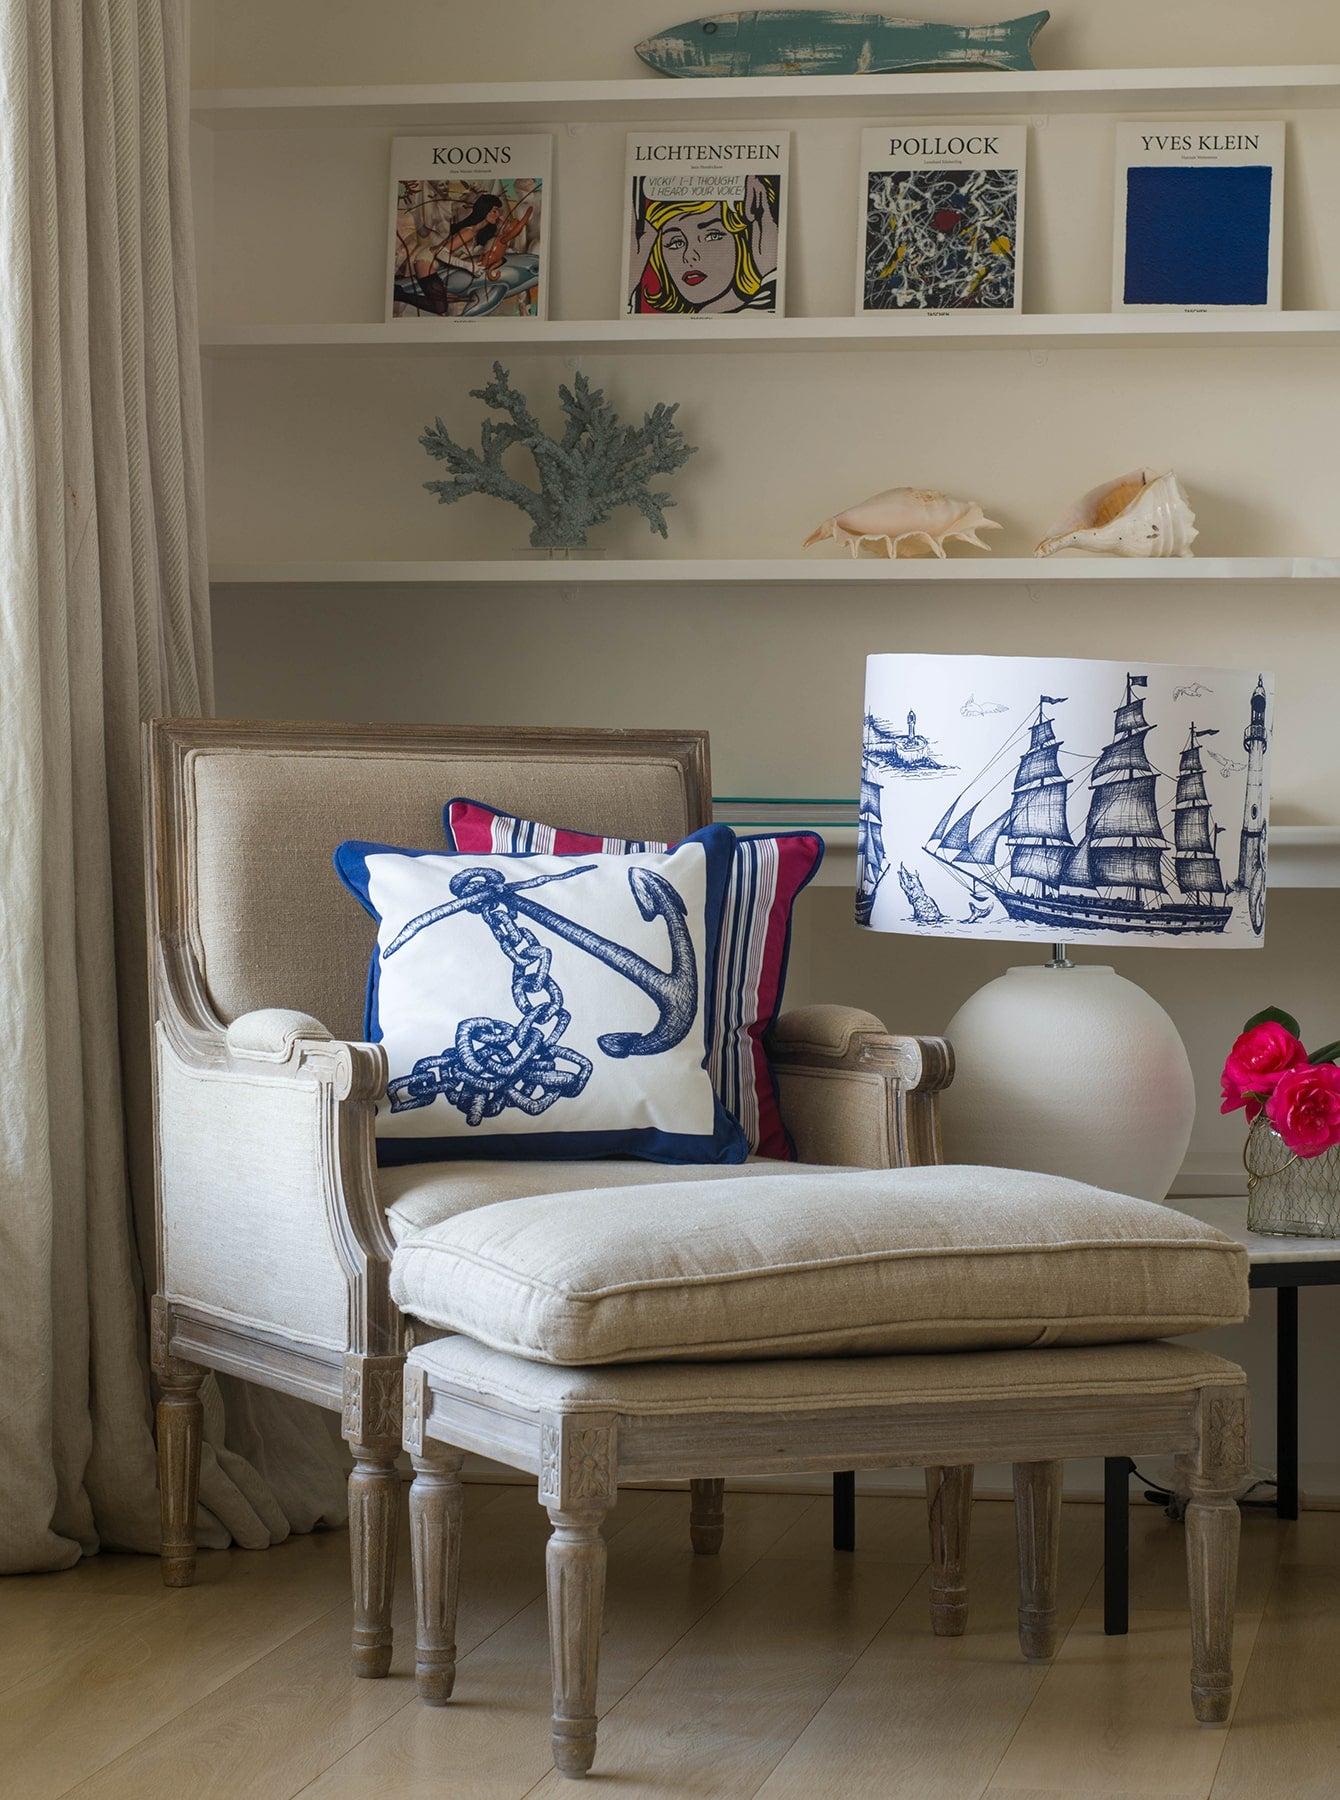 Our Classic Navy Maritime design on a white background on a lampbase on a side table next to a chair and matching footstool.Behind the chair is a bookcase with art books, coral and shells on the shelves